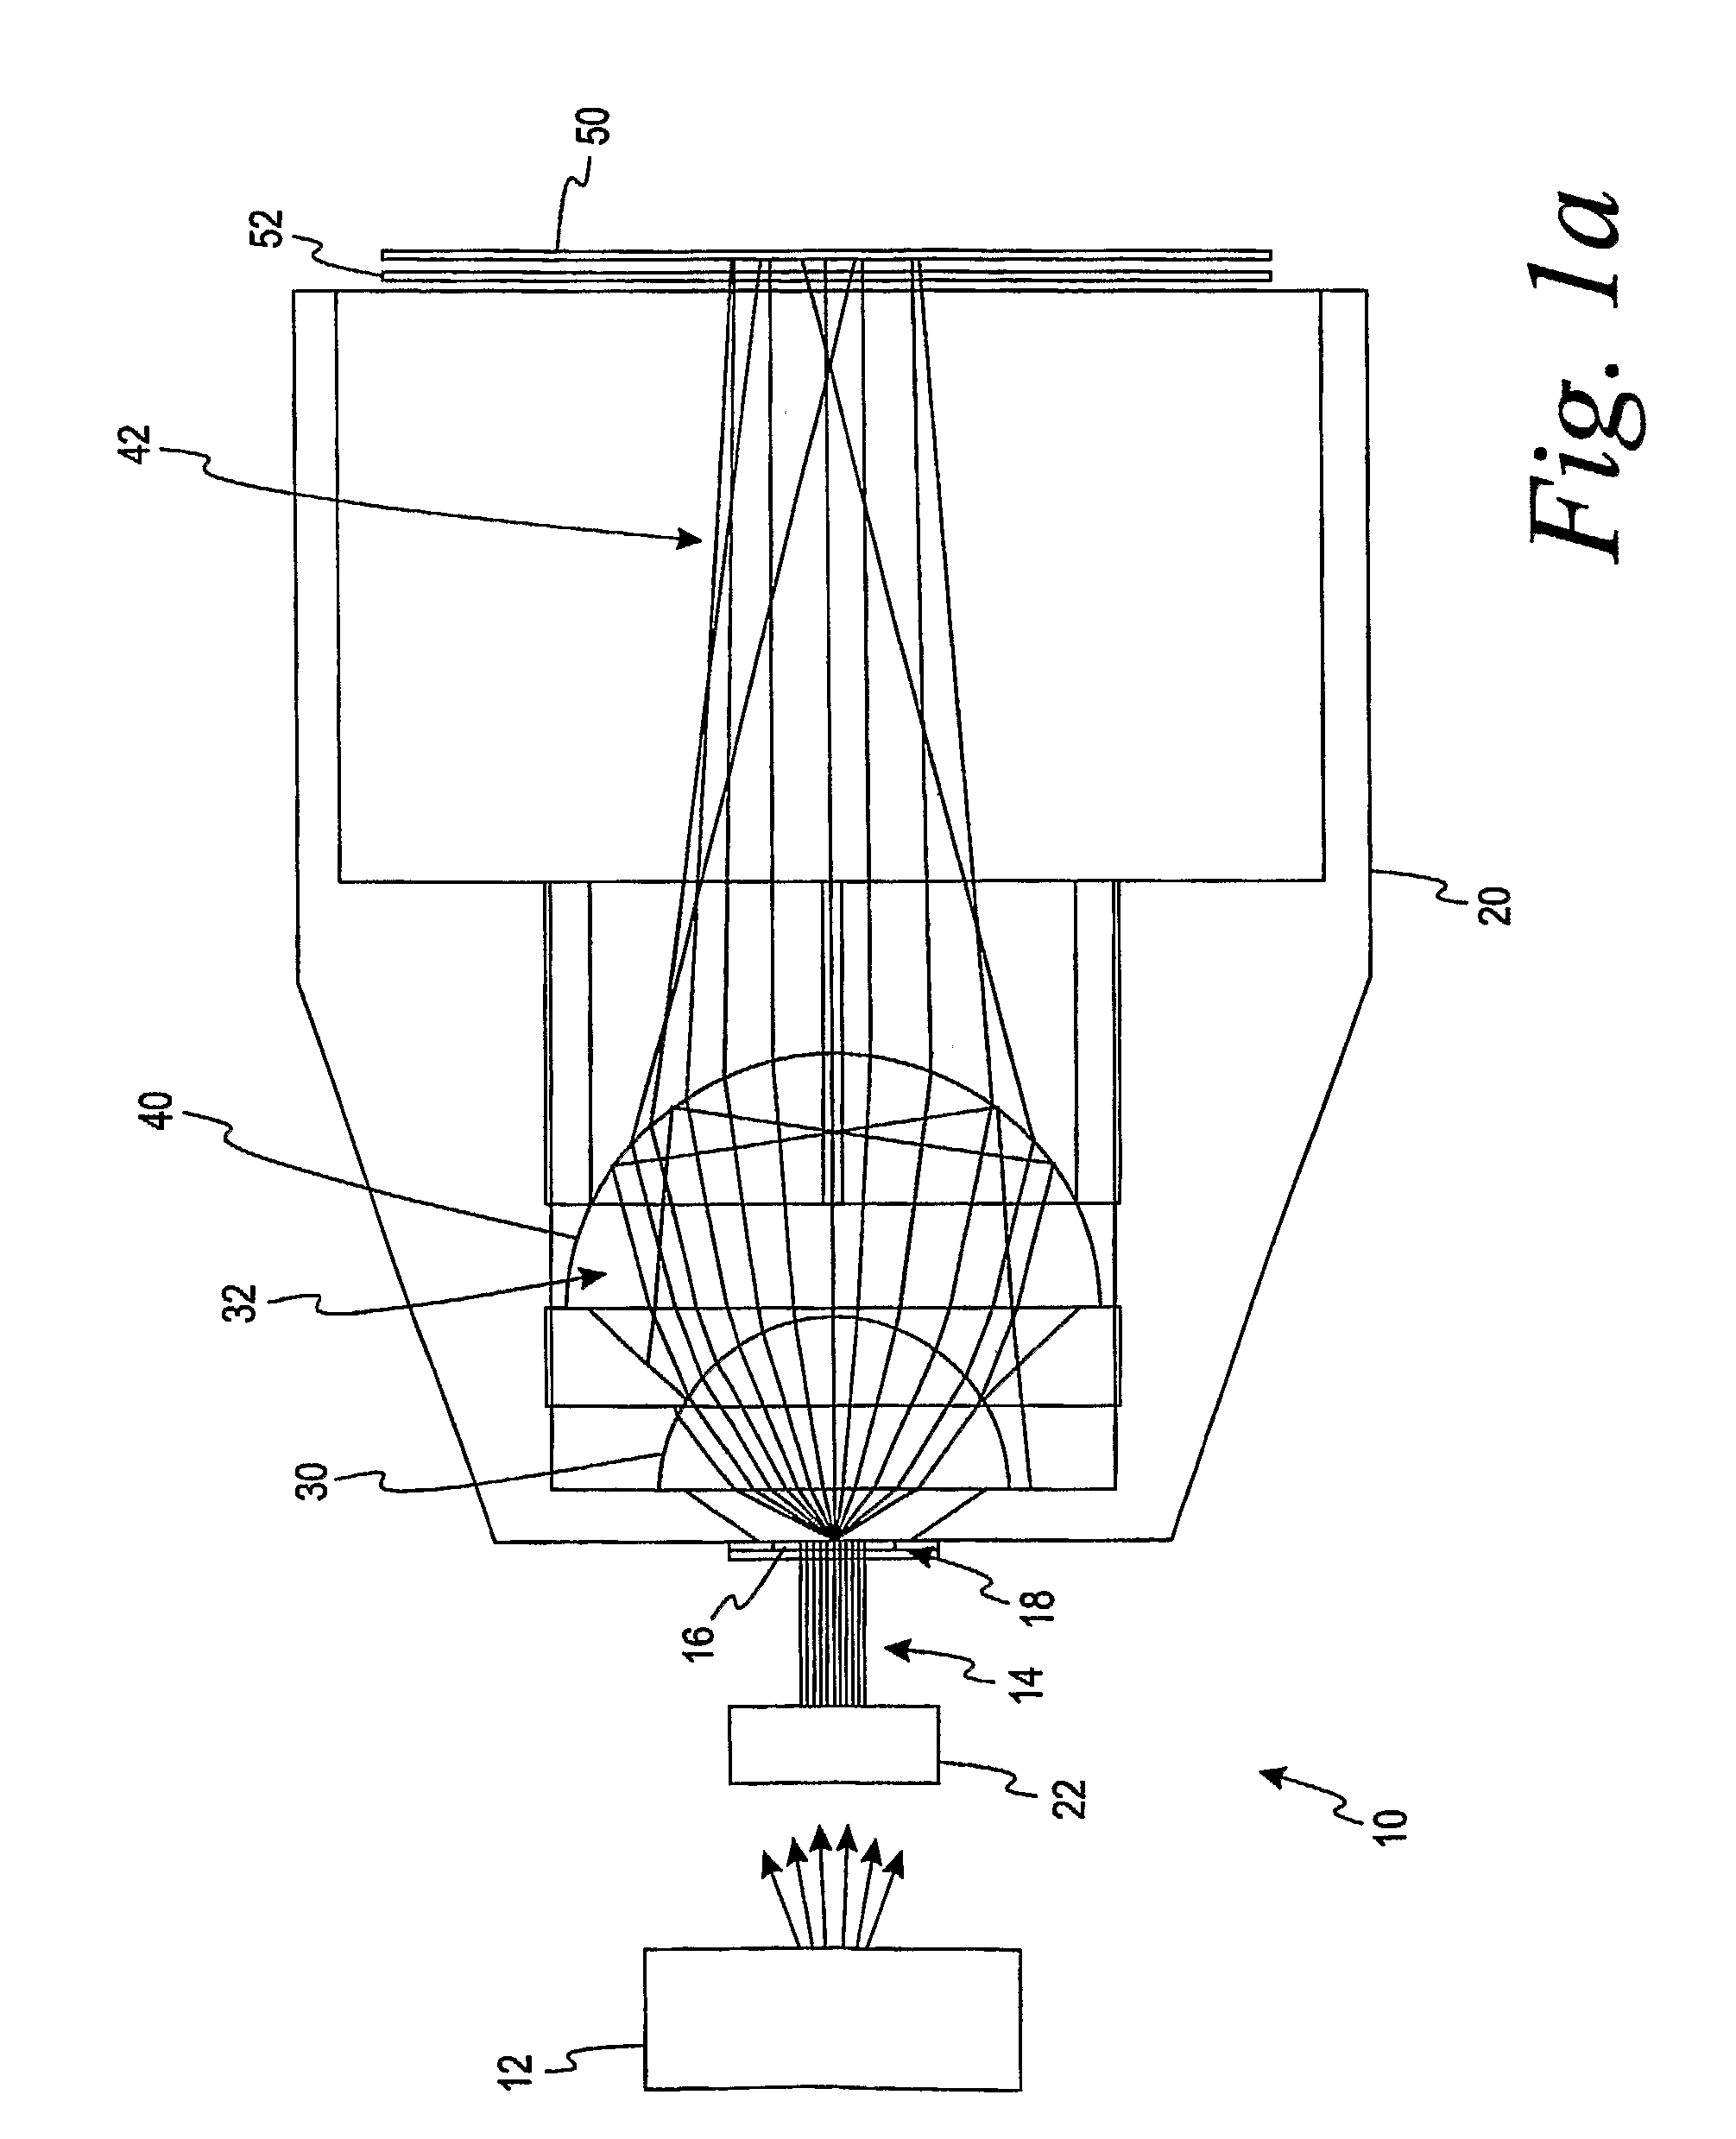 Transmission spectroscopy system for use in the determination of analytes in body fluid